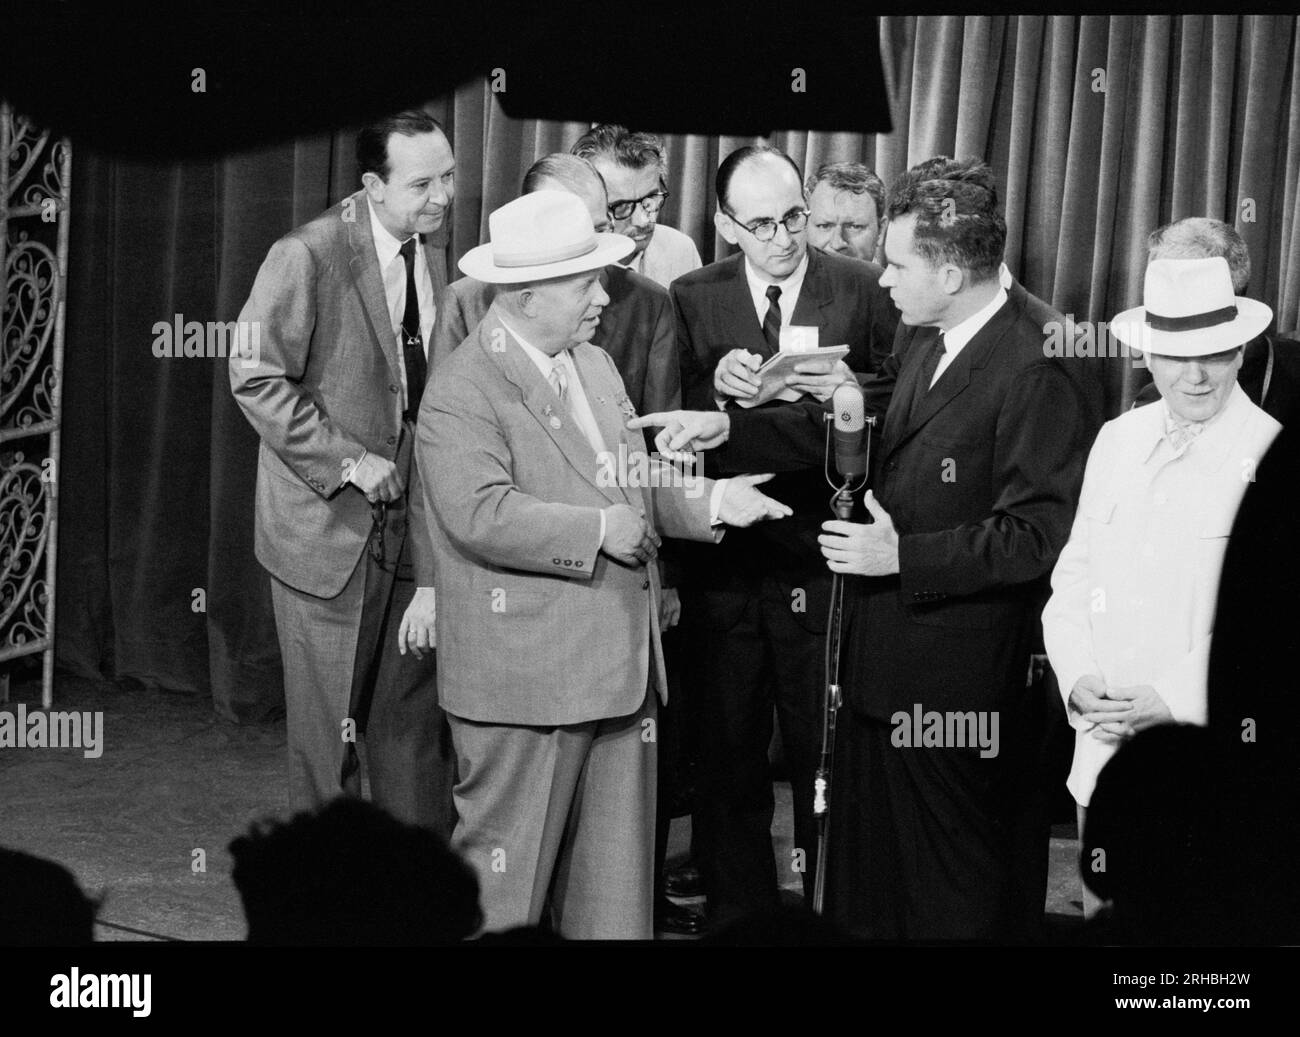 Moscow, U.S.S.R.:   July 24, 1959 Soviet Premier Nikita  Khrushchev & United States Vice President Richard Nixon banter on television at the American exhibit in what became know as the 'kitchen debate'. Stock Photo